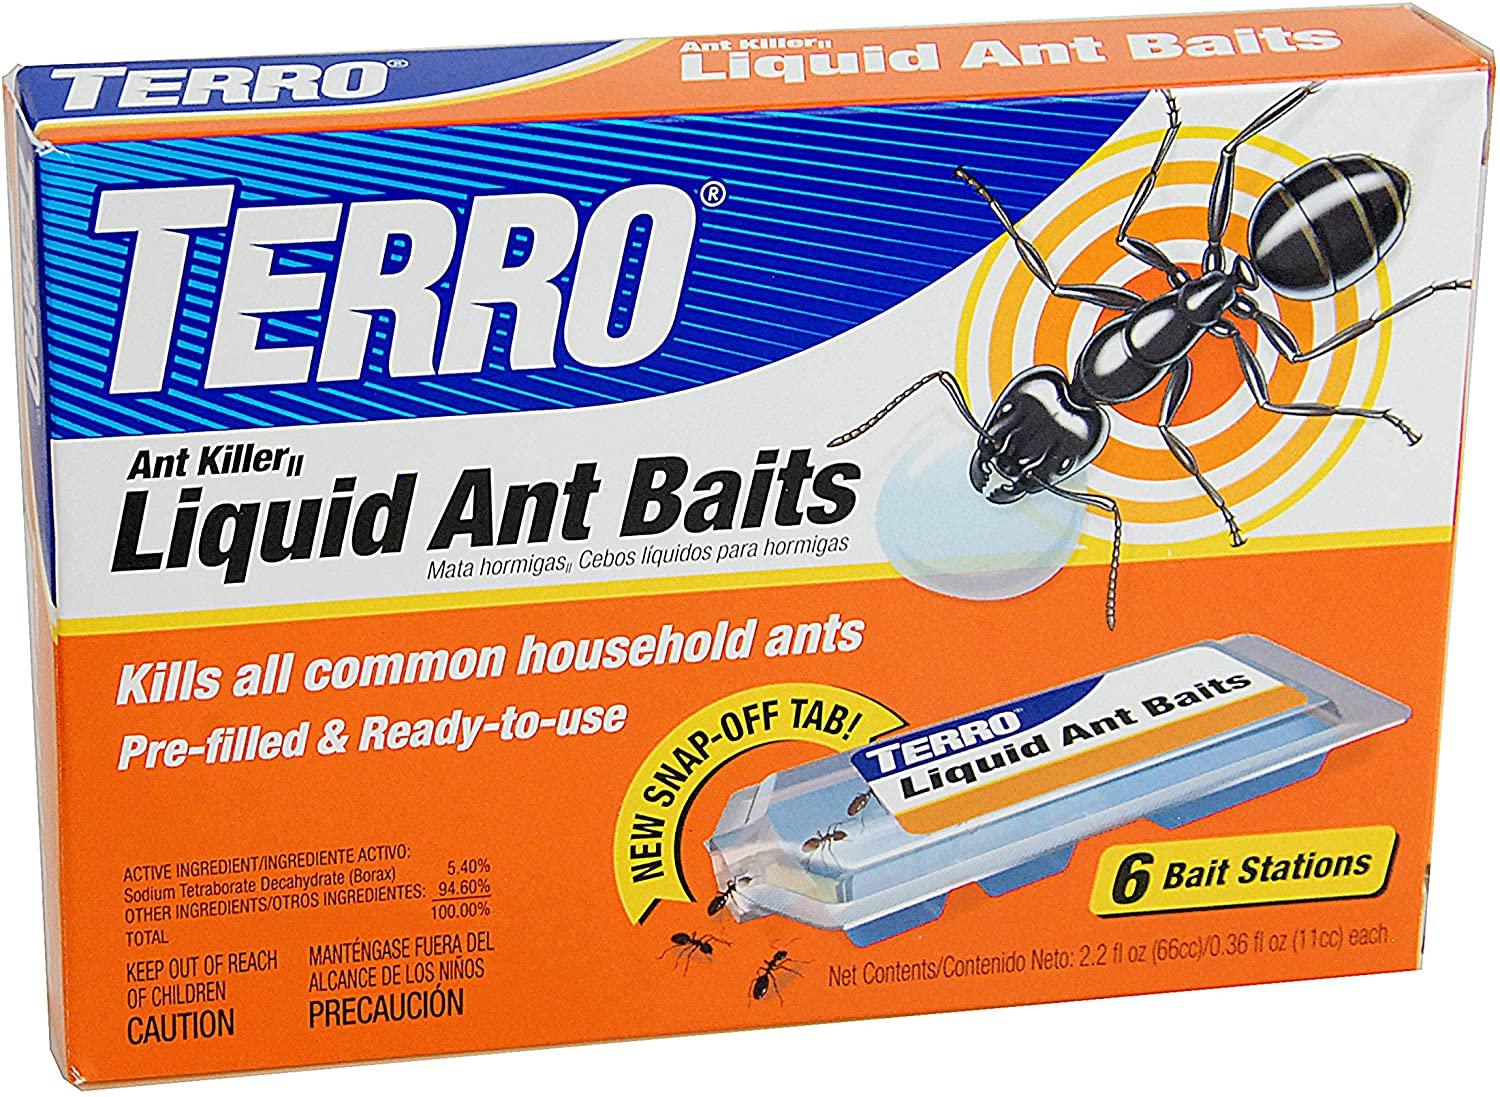 Terro  T300 Liquid Ant Baits Bait Stations for $4.19 Shipped